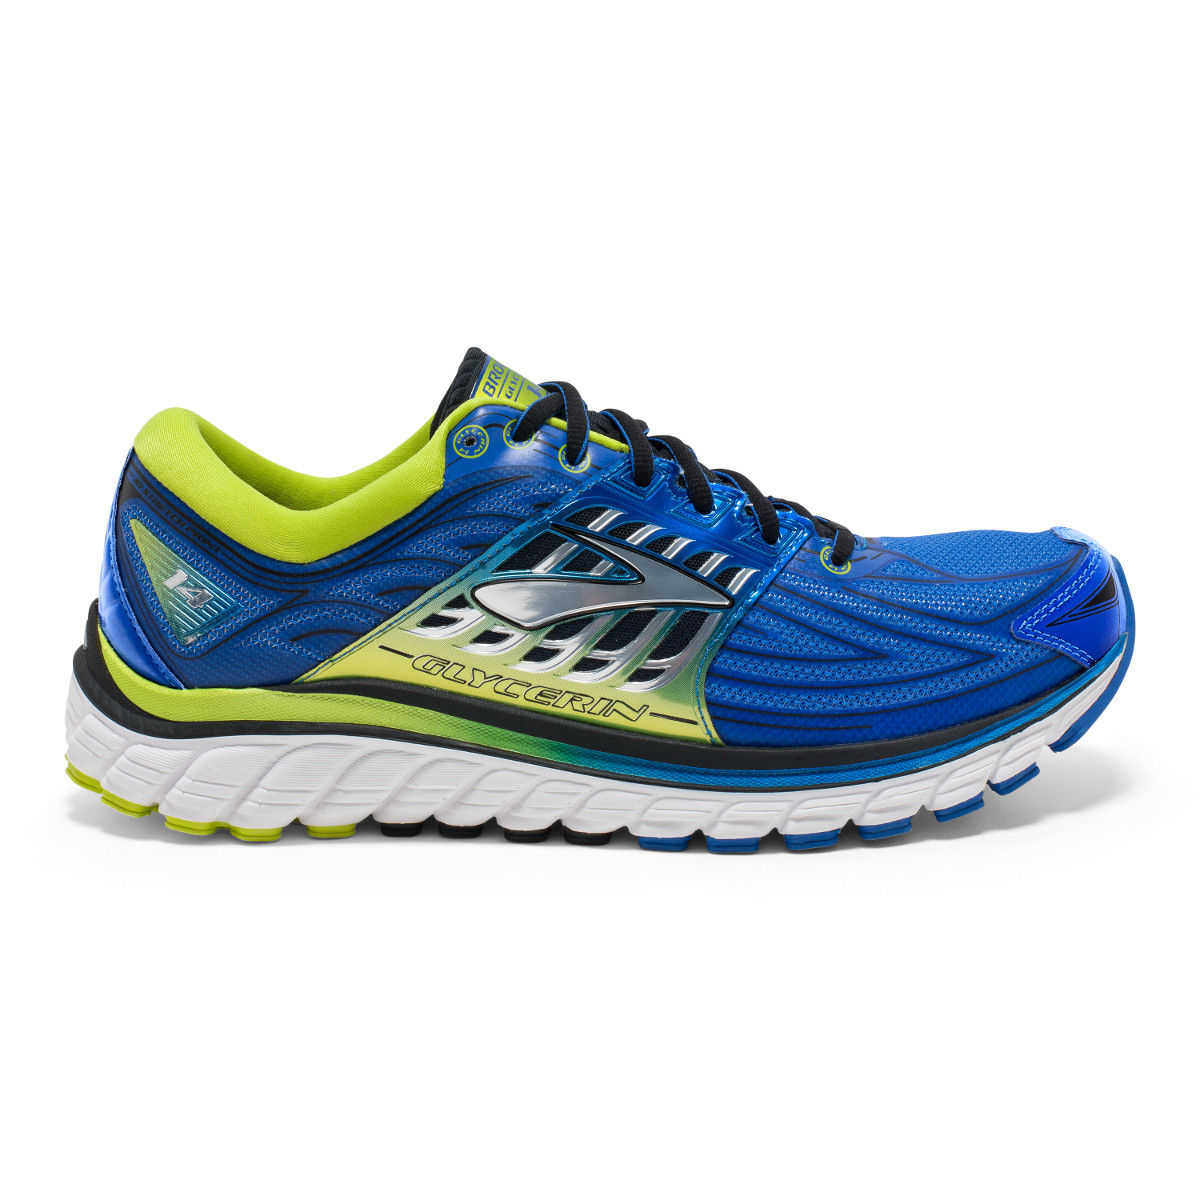 Glycerin 14 - Electric Brooks Lime Punch Black